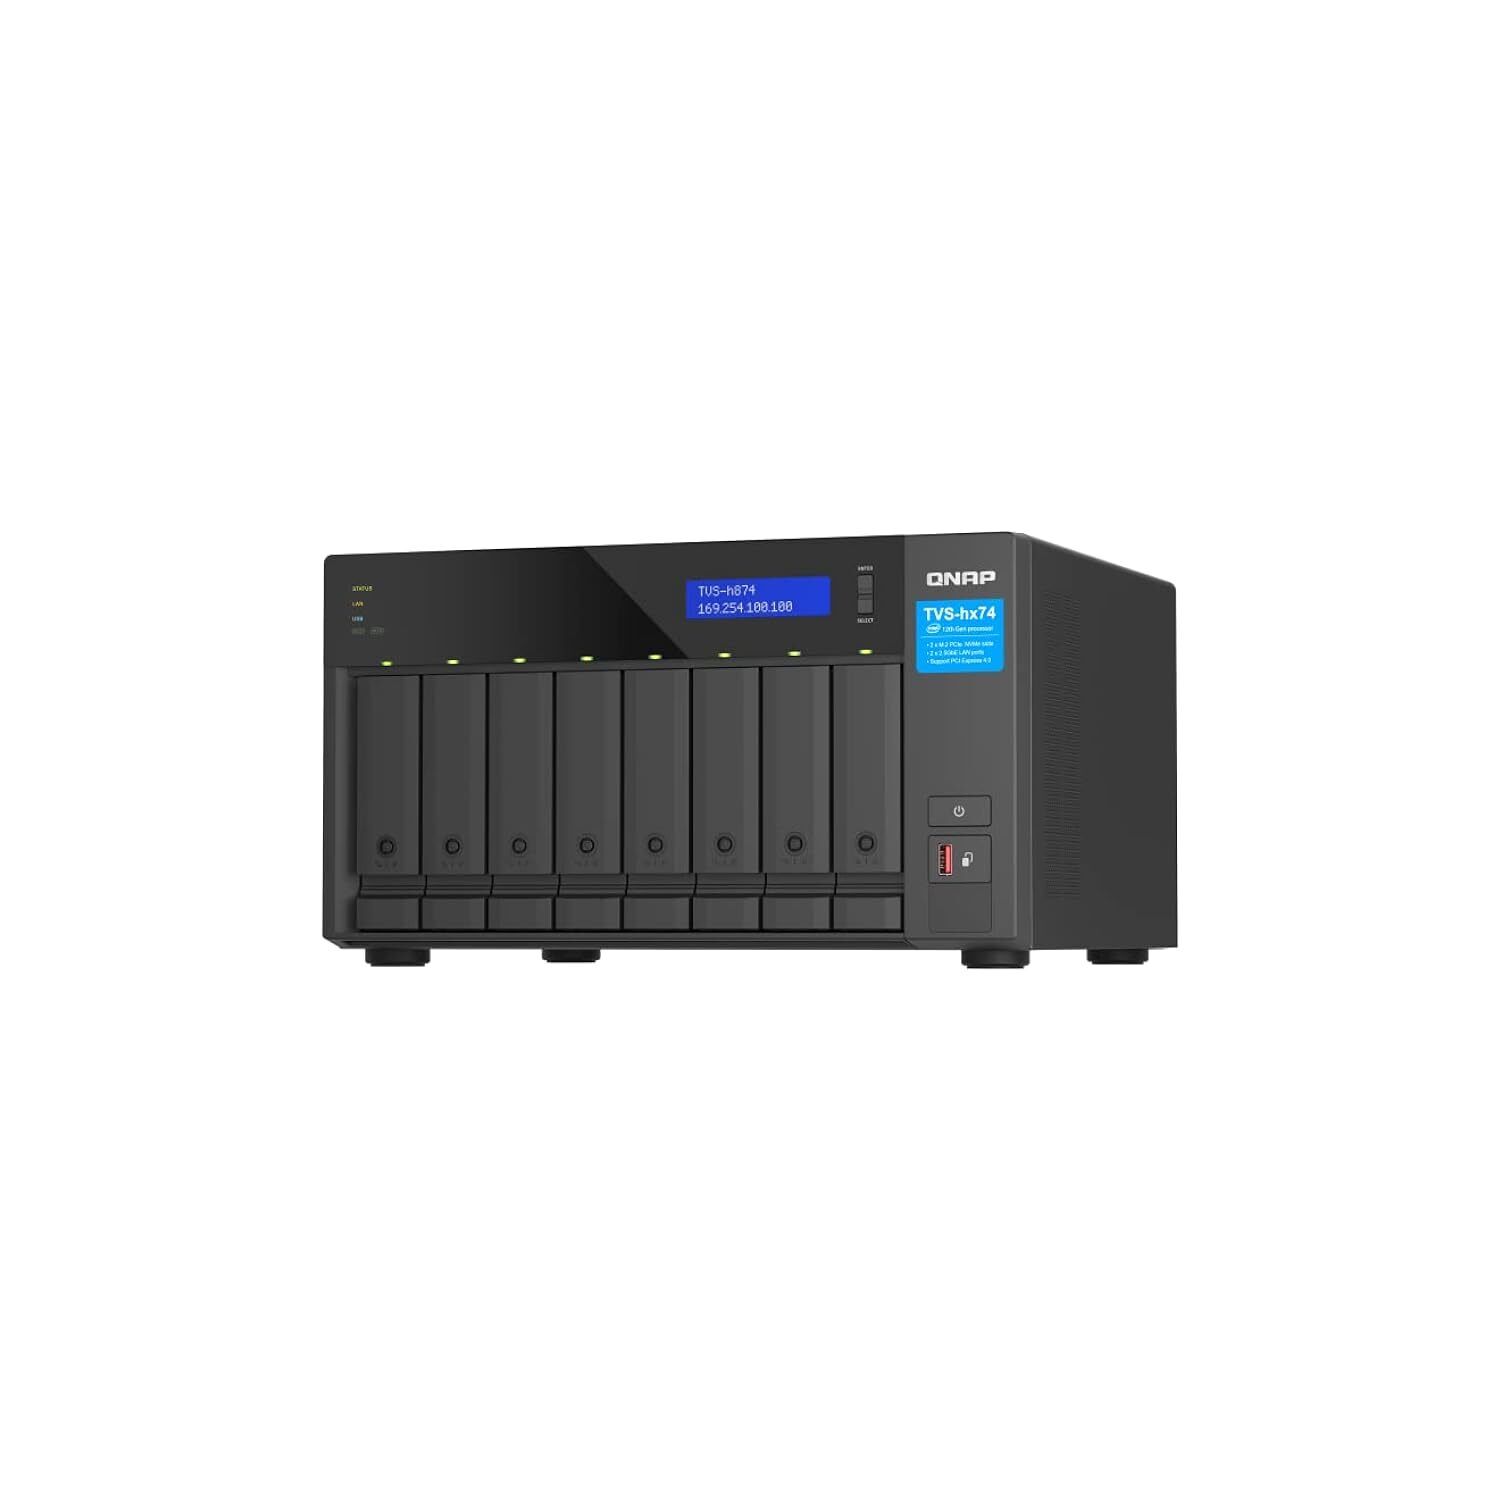 QNAP TVS-h874-i5-32G-US 8 Bay High-Speed Desktop NAS with M.2 PCIe Slots, 12th